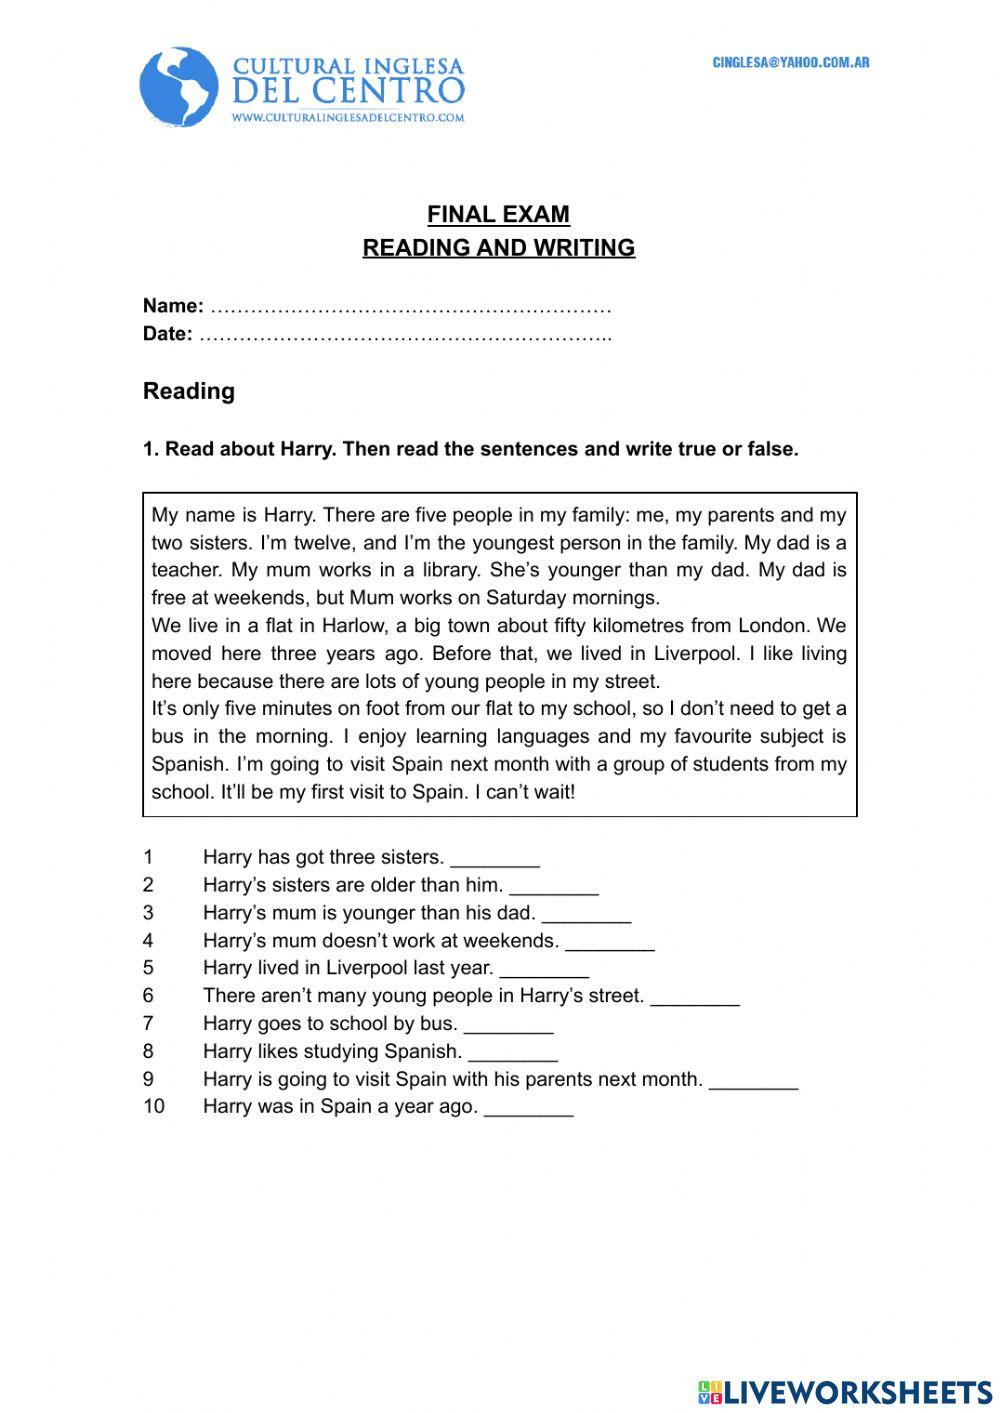 FINAL TEST - Reading and Writing Test (1st Adolescent)